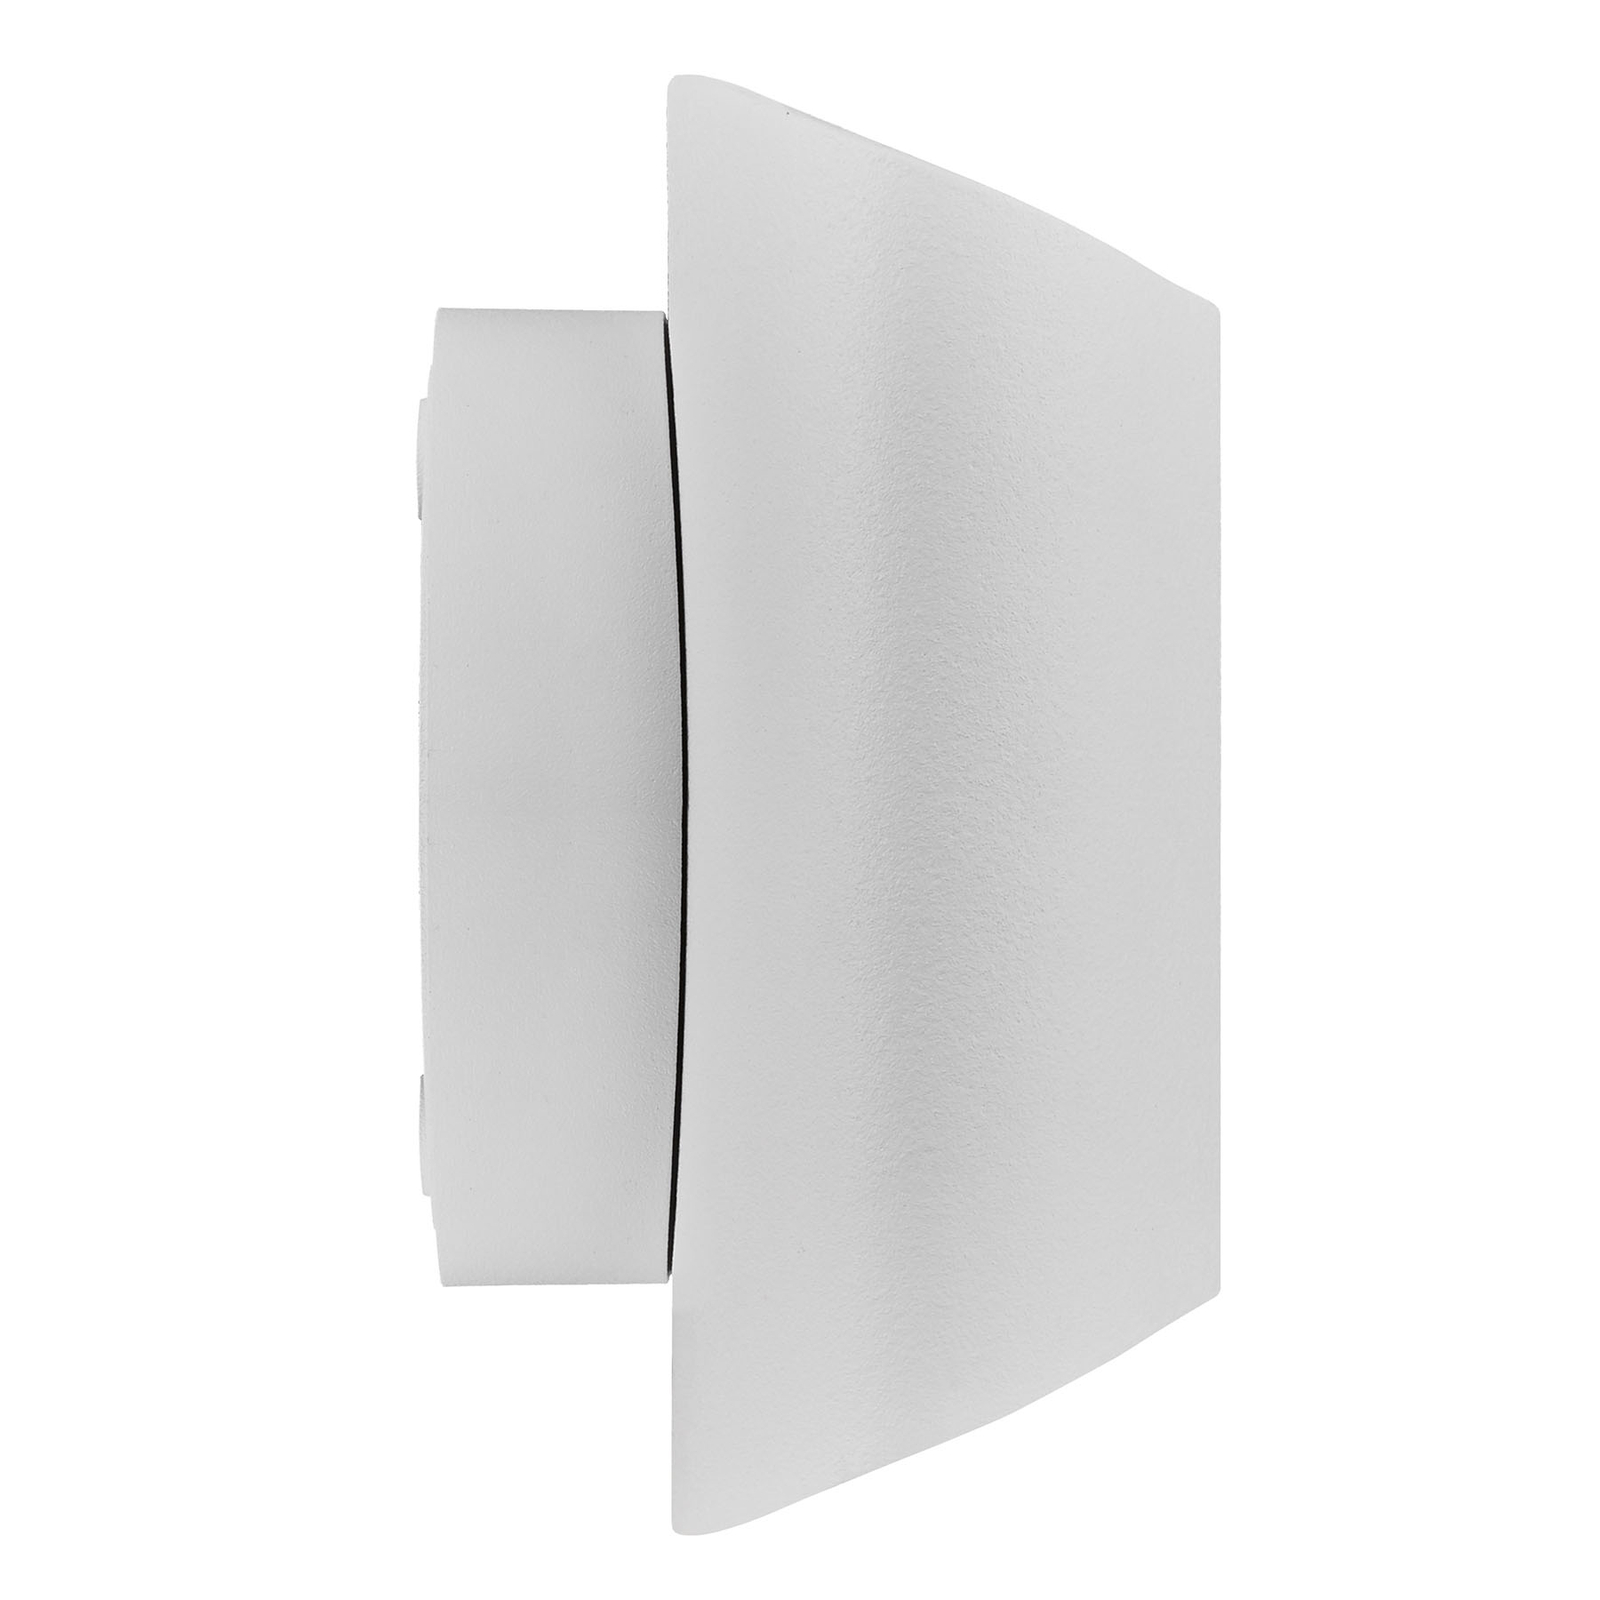 Grip LED outdoor wall lamp, CCT smart home, white